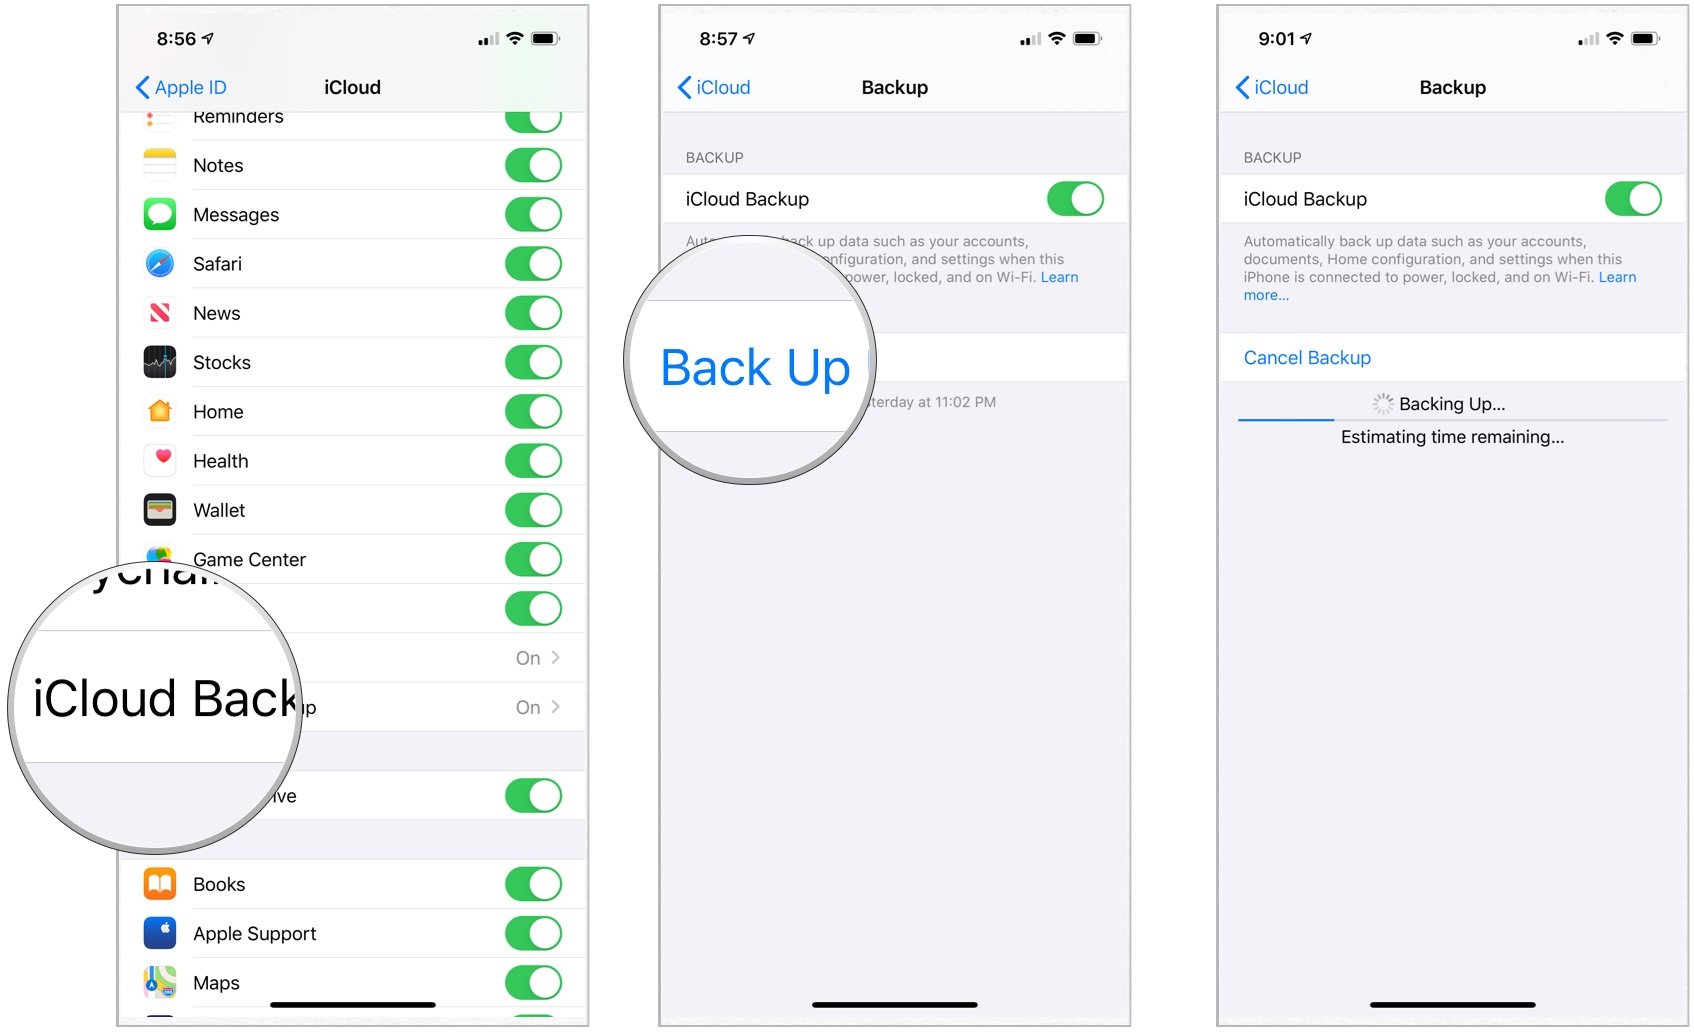 To backup your device, scroll down and select iCloud Backup. Tap the switch to turn it on. Choose Back Up Now.